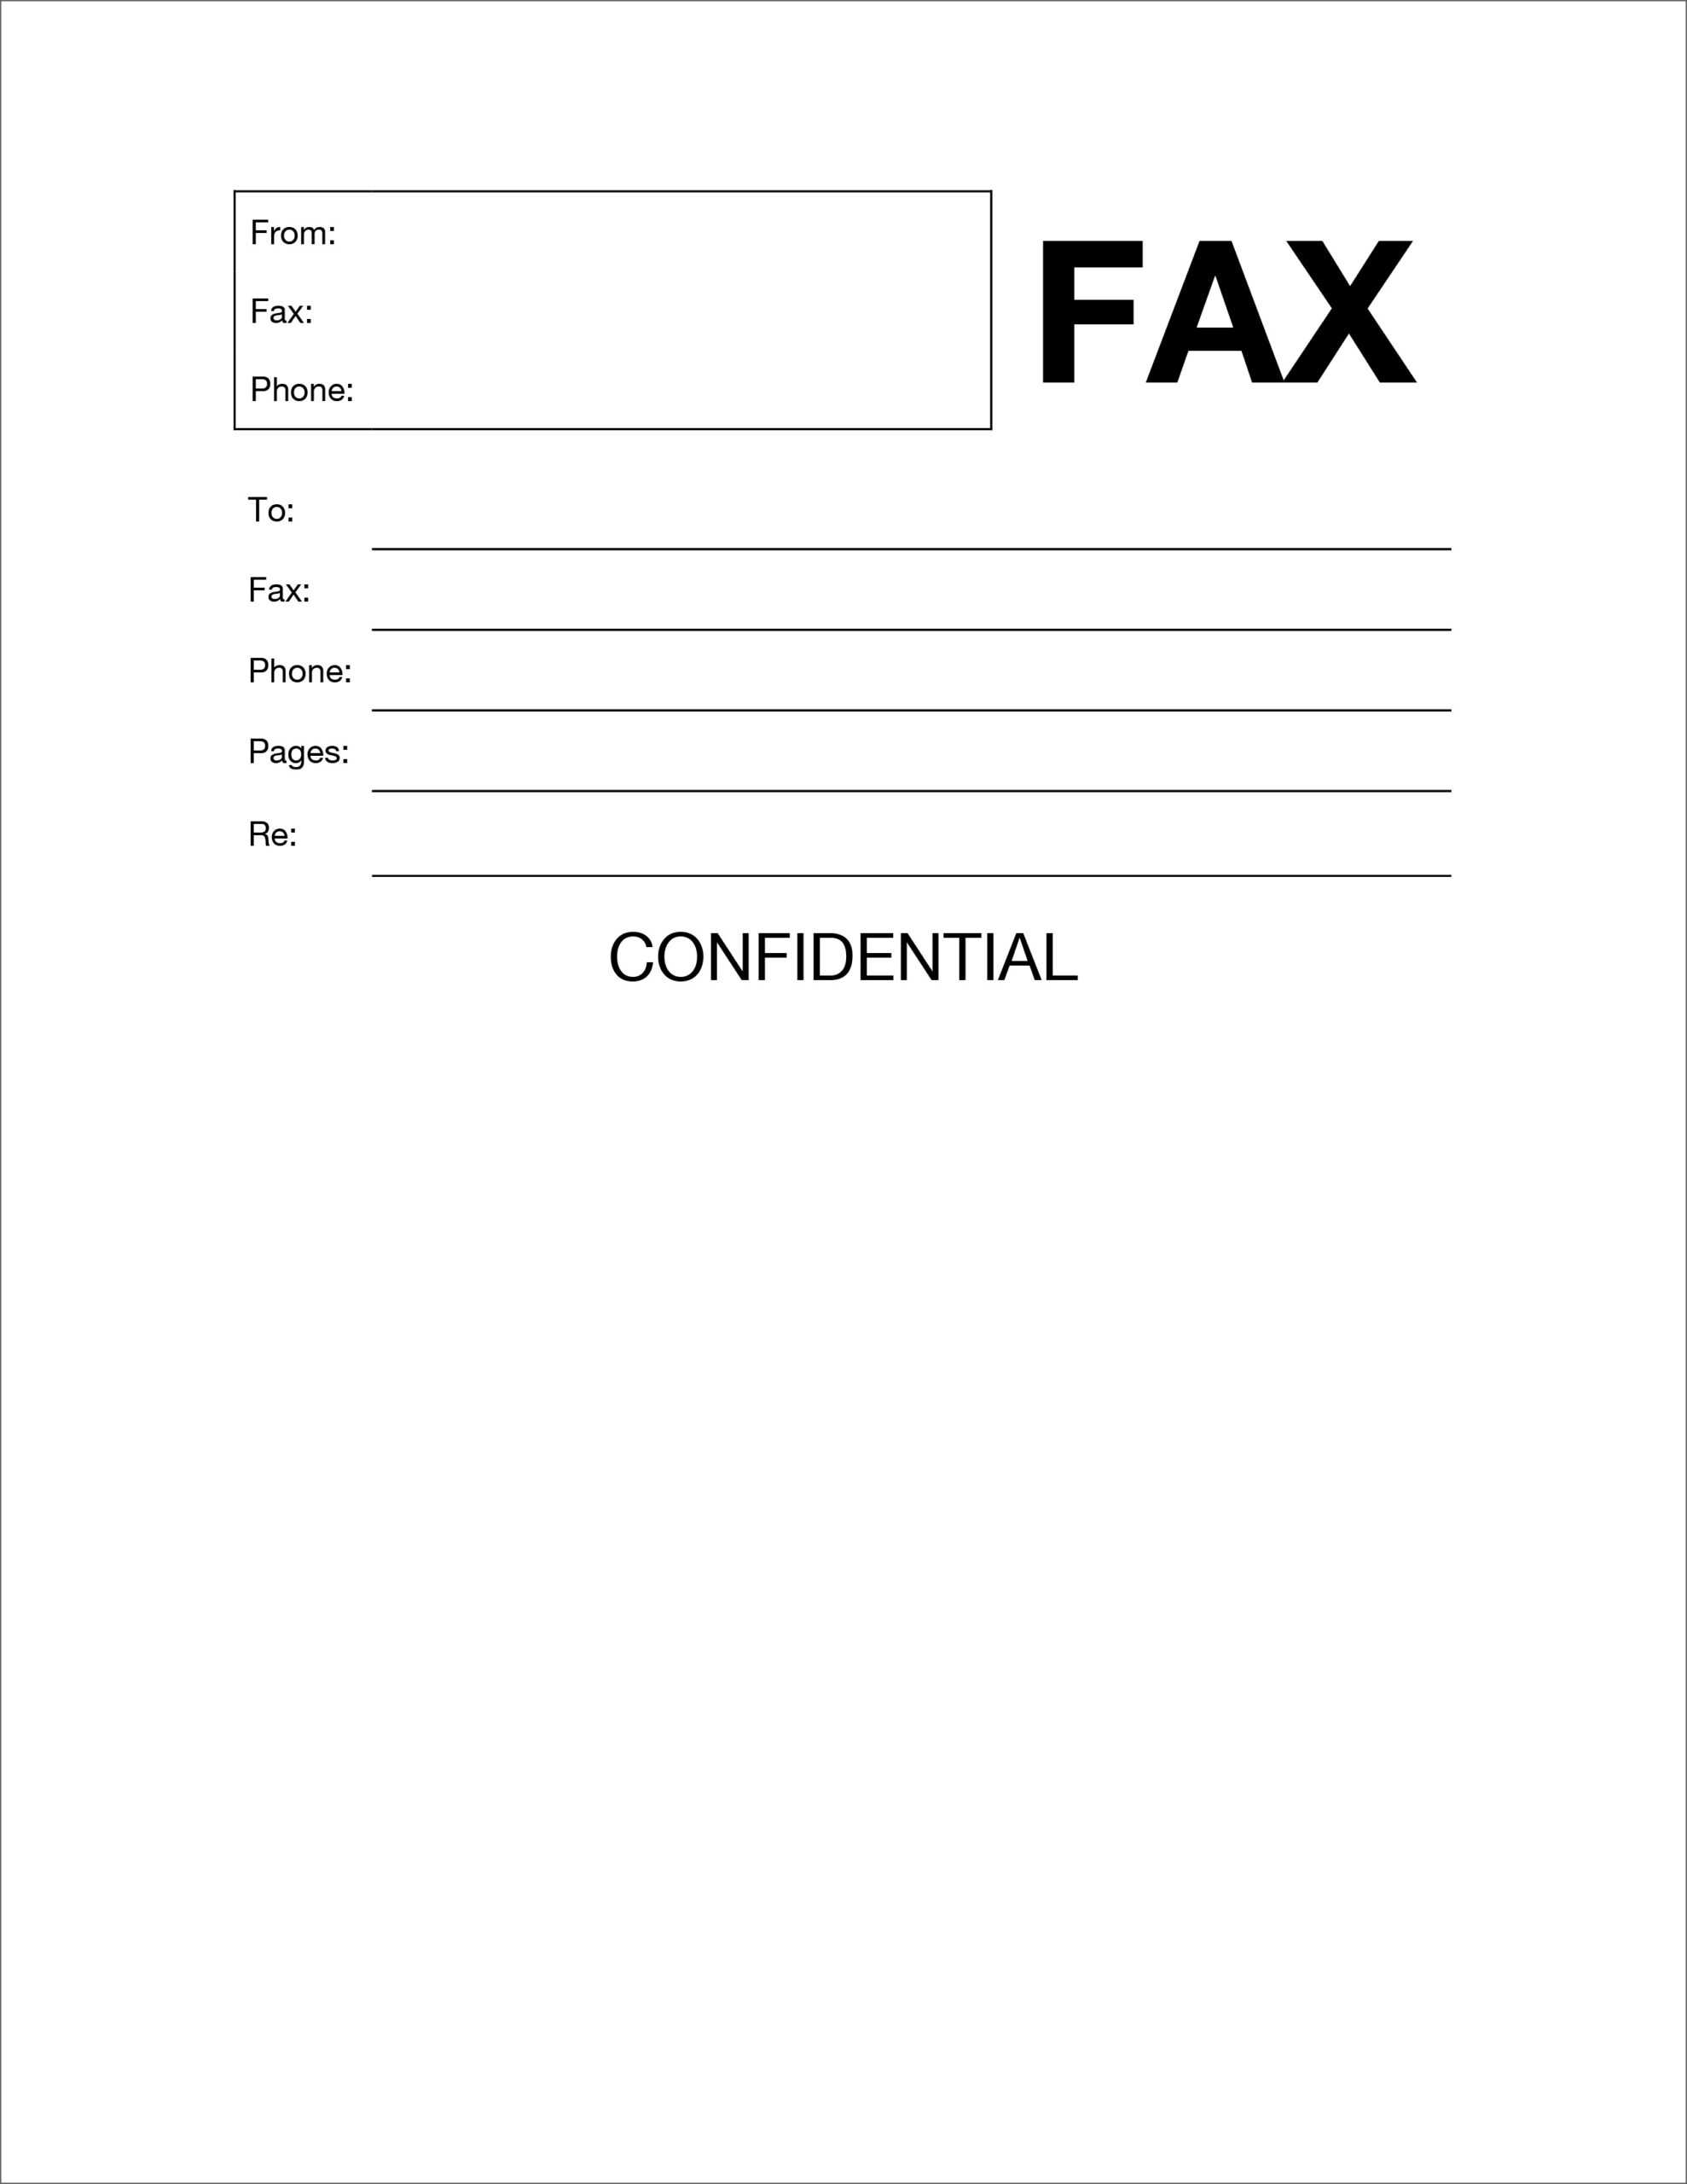 Fax Templates In Word – Dalep.midnightpig.co Inside Fax Cover Sheet Template Word 2010